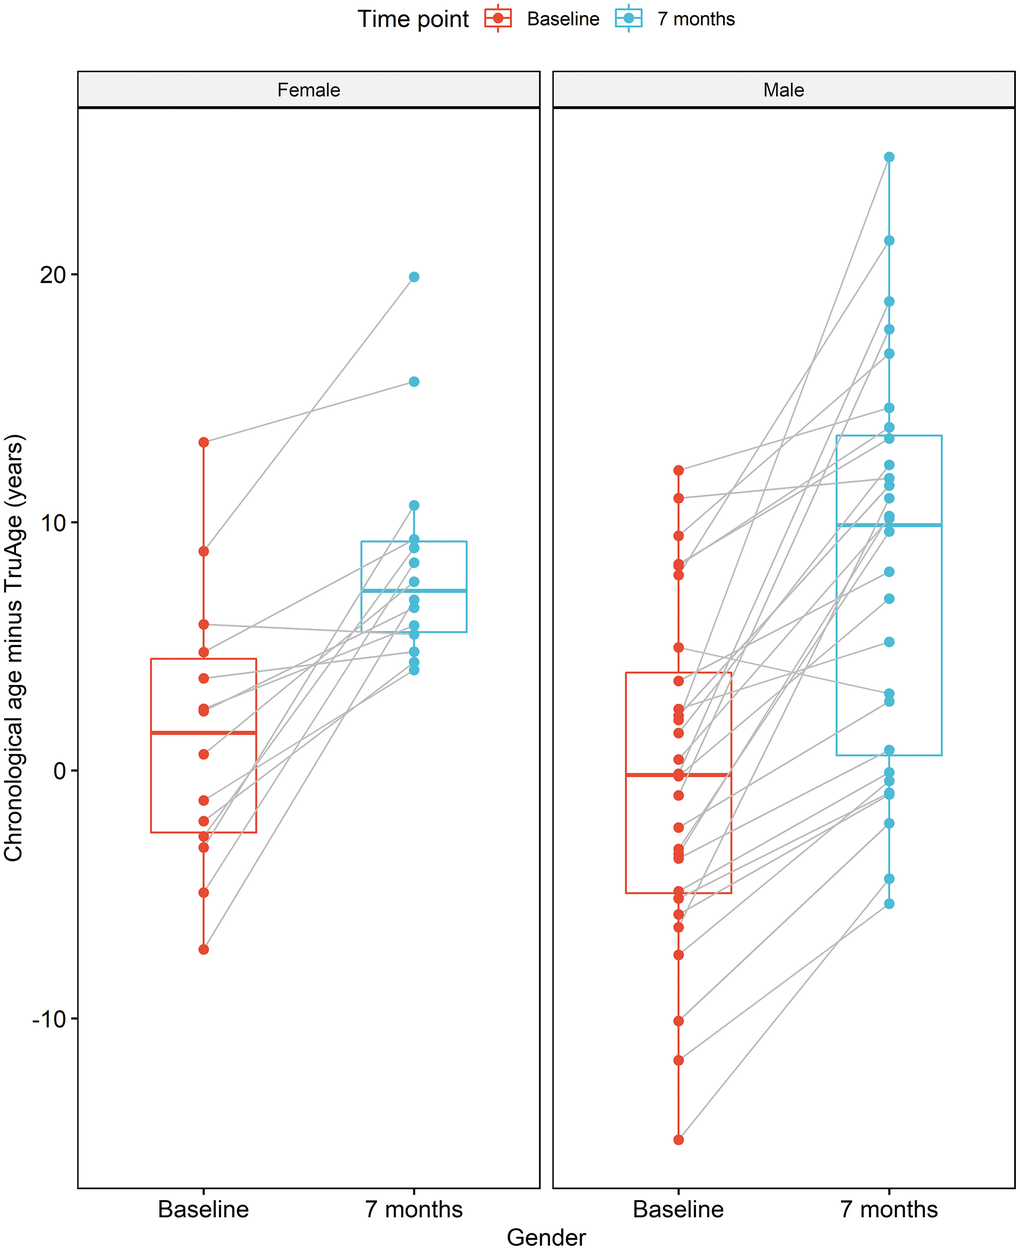 CaAKG decreases methylation age regardless of gender. The image displays the effects of CaAKG on methylation age between the start and end of treatment, broken down by gender. For each gender, the red and blue paired box plots, depict the data at baseline and endpoint, respectively. The boxplots are based on the median and the 25th and 75th quartiles.